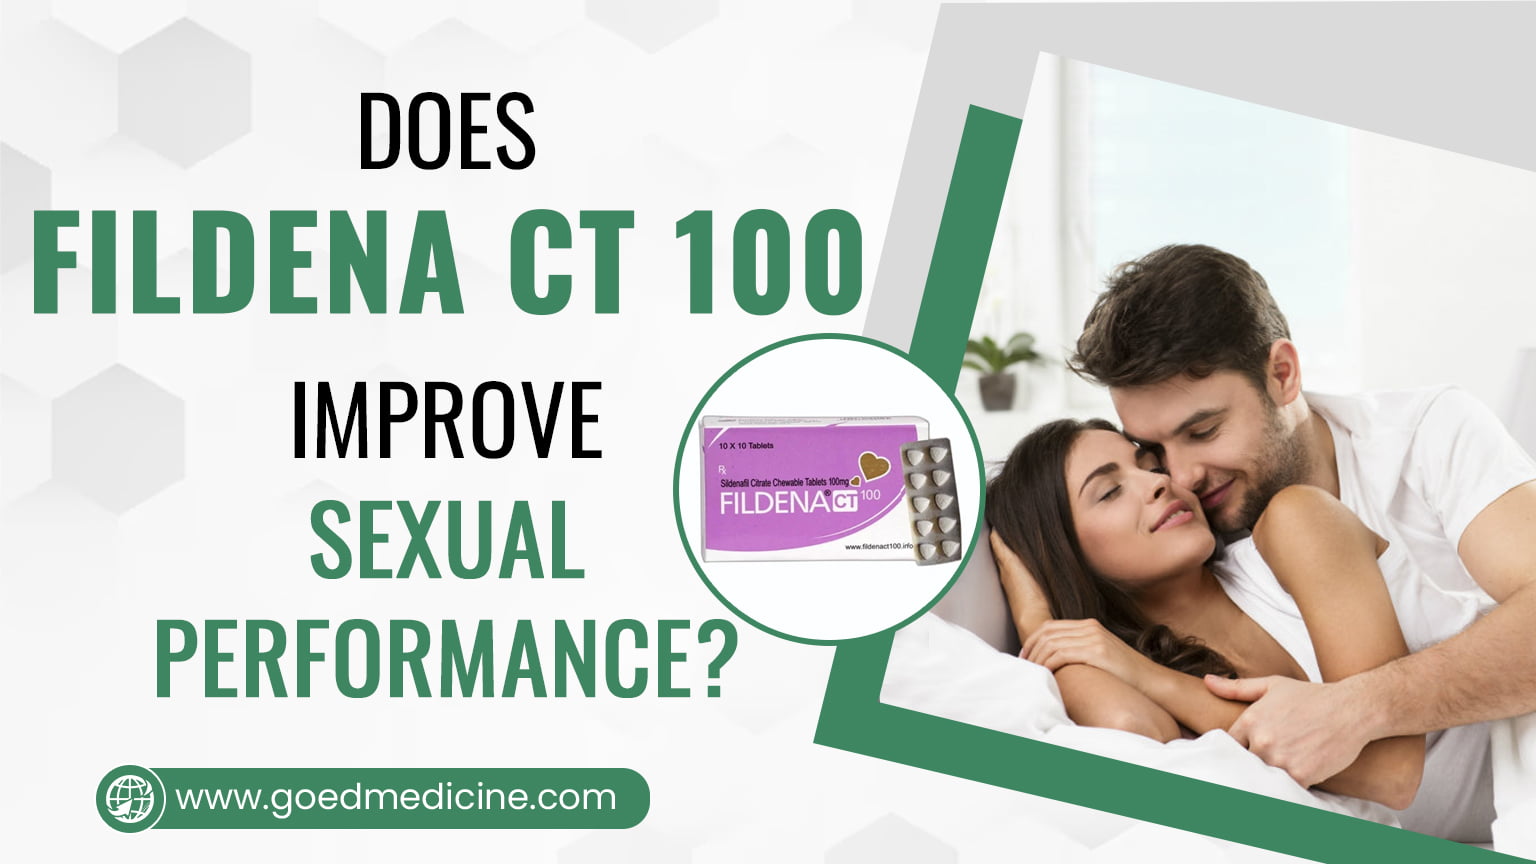 Does Fildena CT 100 Improve Sexual Performance